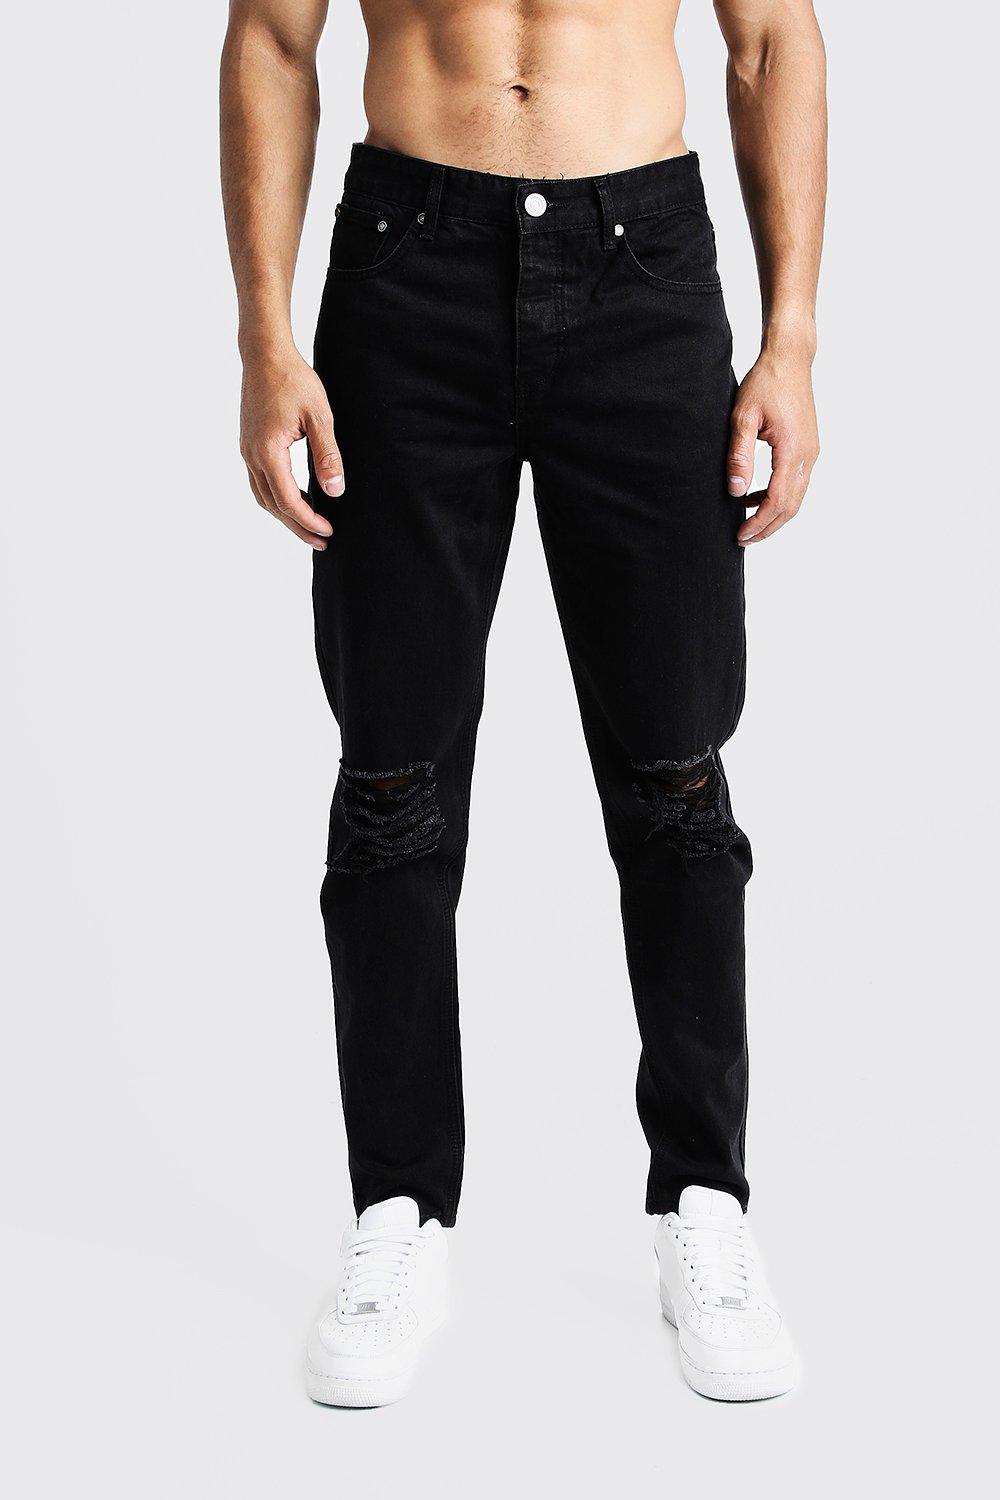 tapered fit jeans